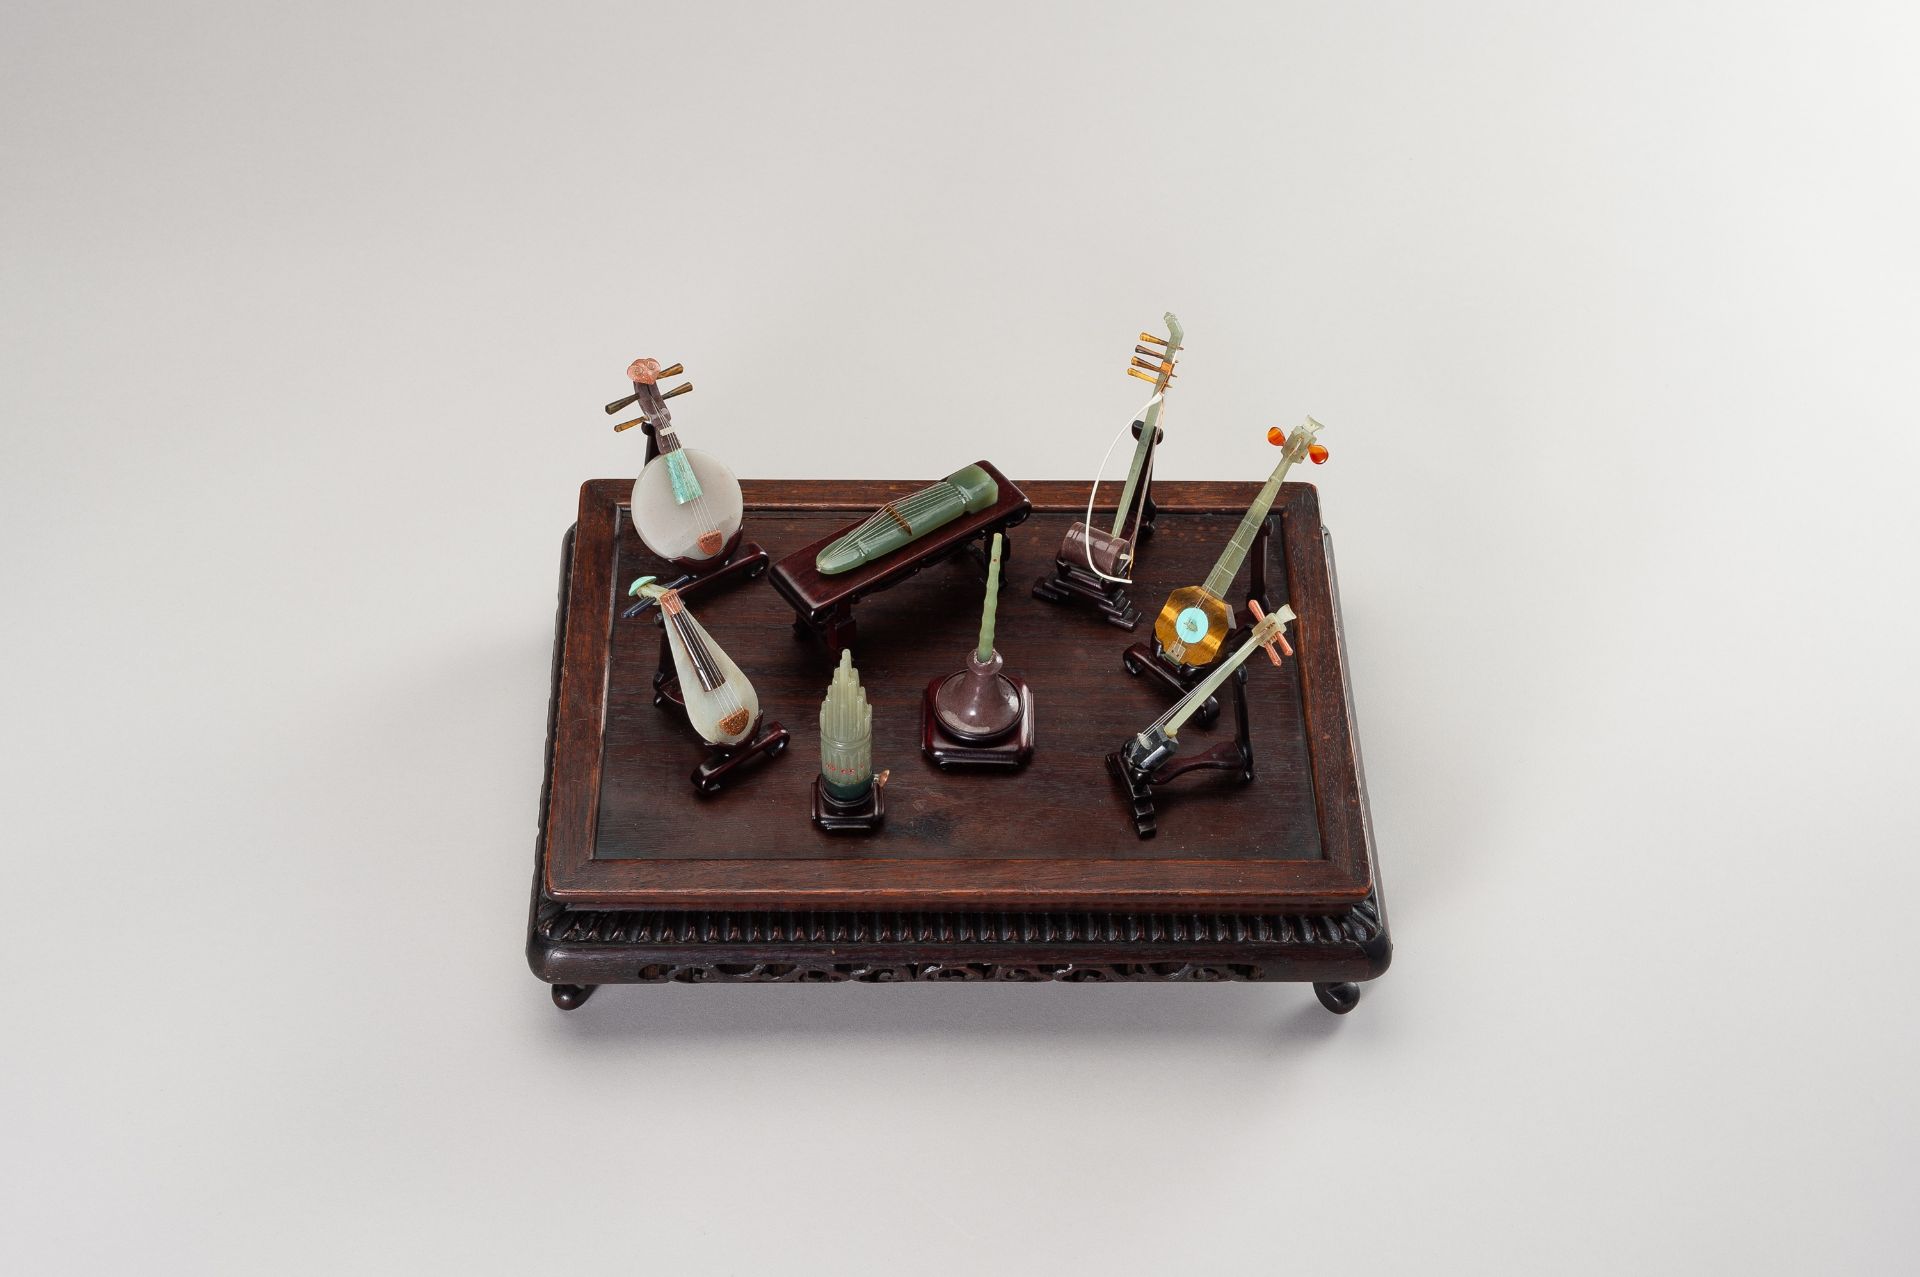 A GROUP OF EIGHT HARDSTONE MINIATURE MODELS OF MUSICAL INSTRUMENTS - Image 3 of 20